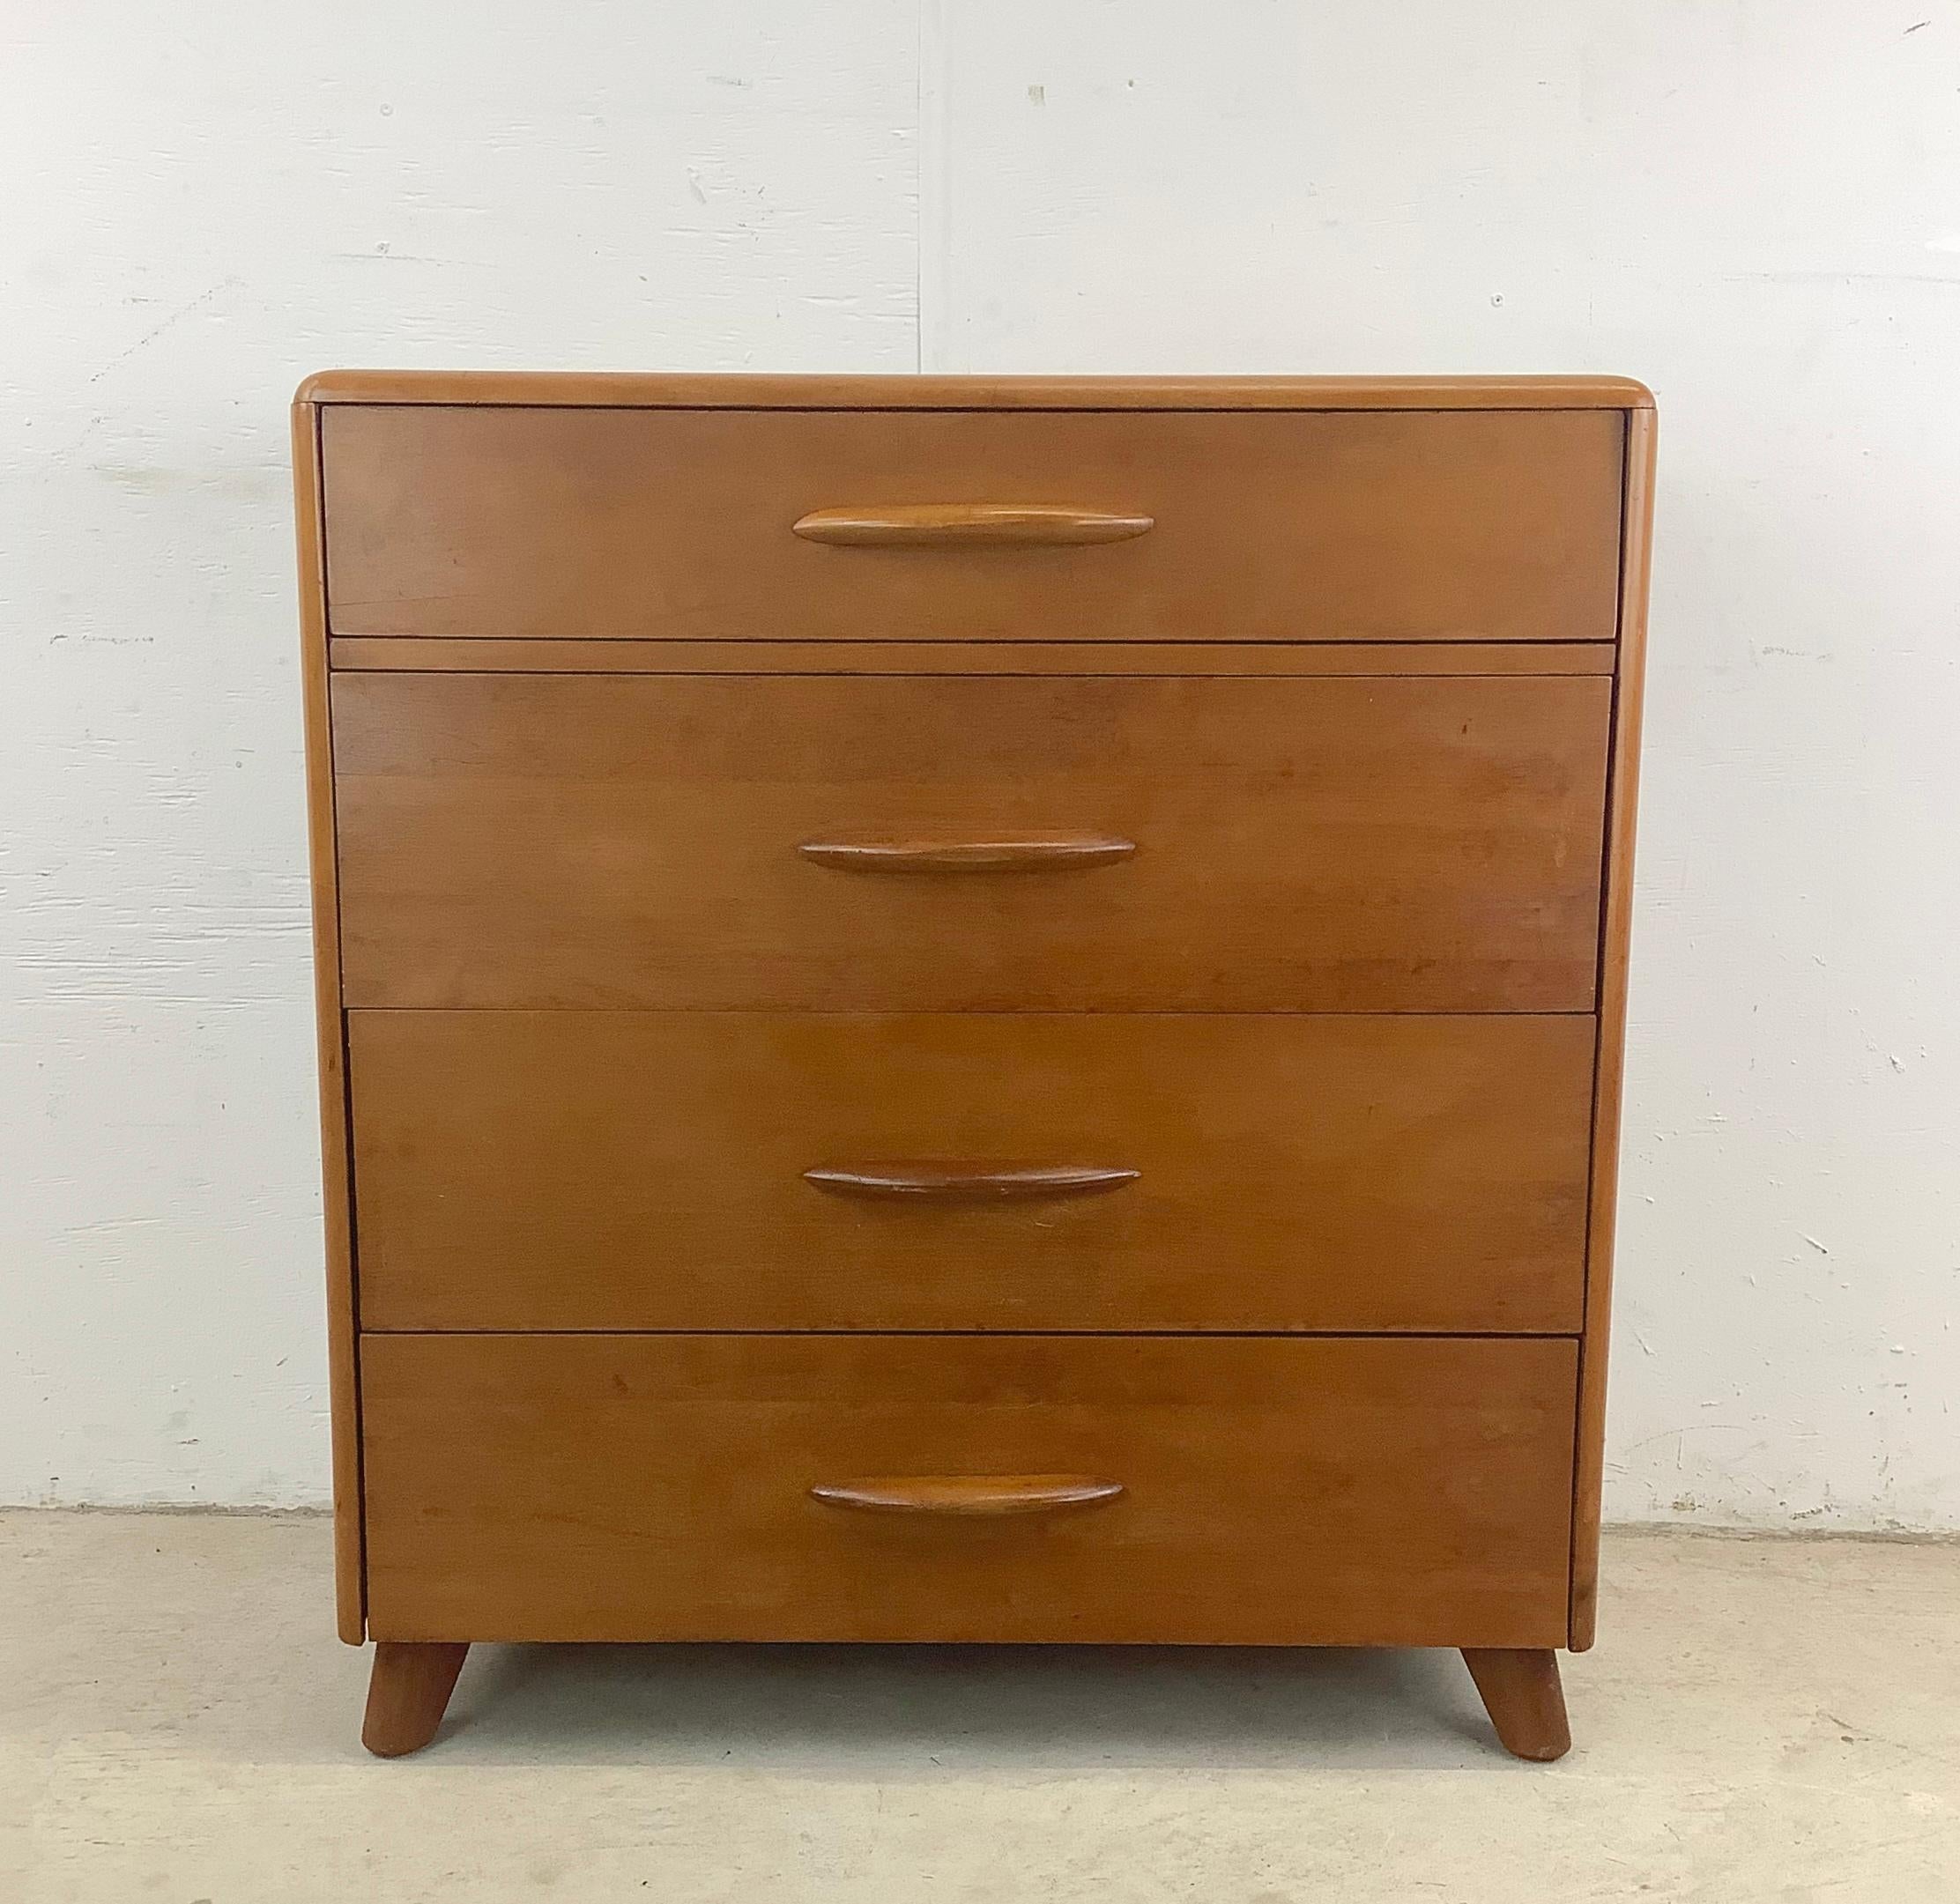 Check out this Vintage Lowboy Dresser with Pull-Out Hideaway Writing Desk – a stunning piece reminiscent of the iconic Heywood Wakefield style that brings both functionality and timeless elegance to your home. Crafted with precision and care, this